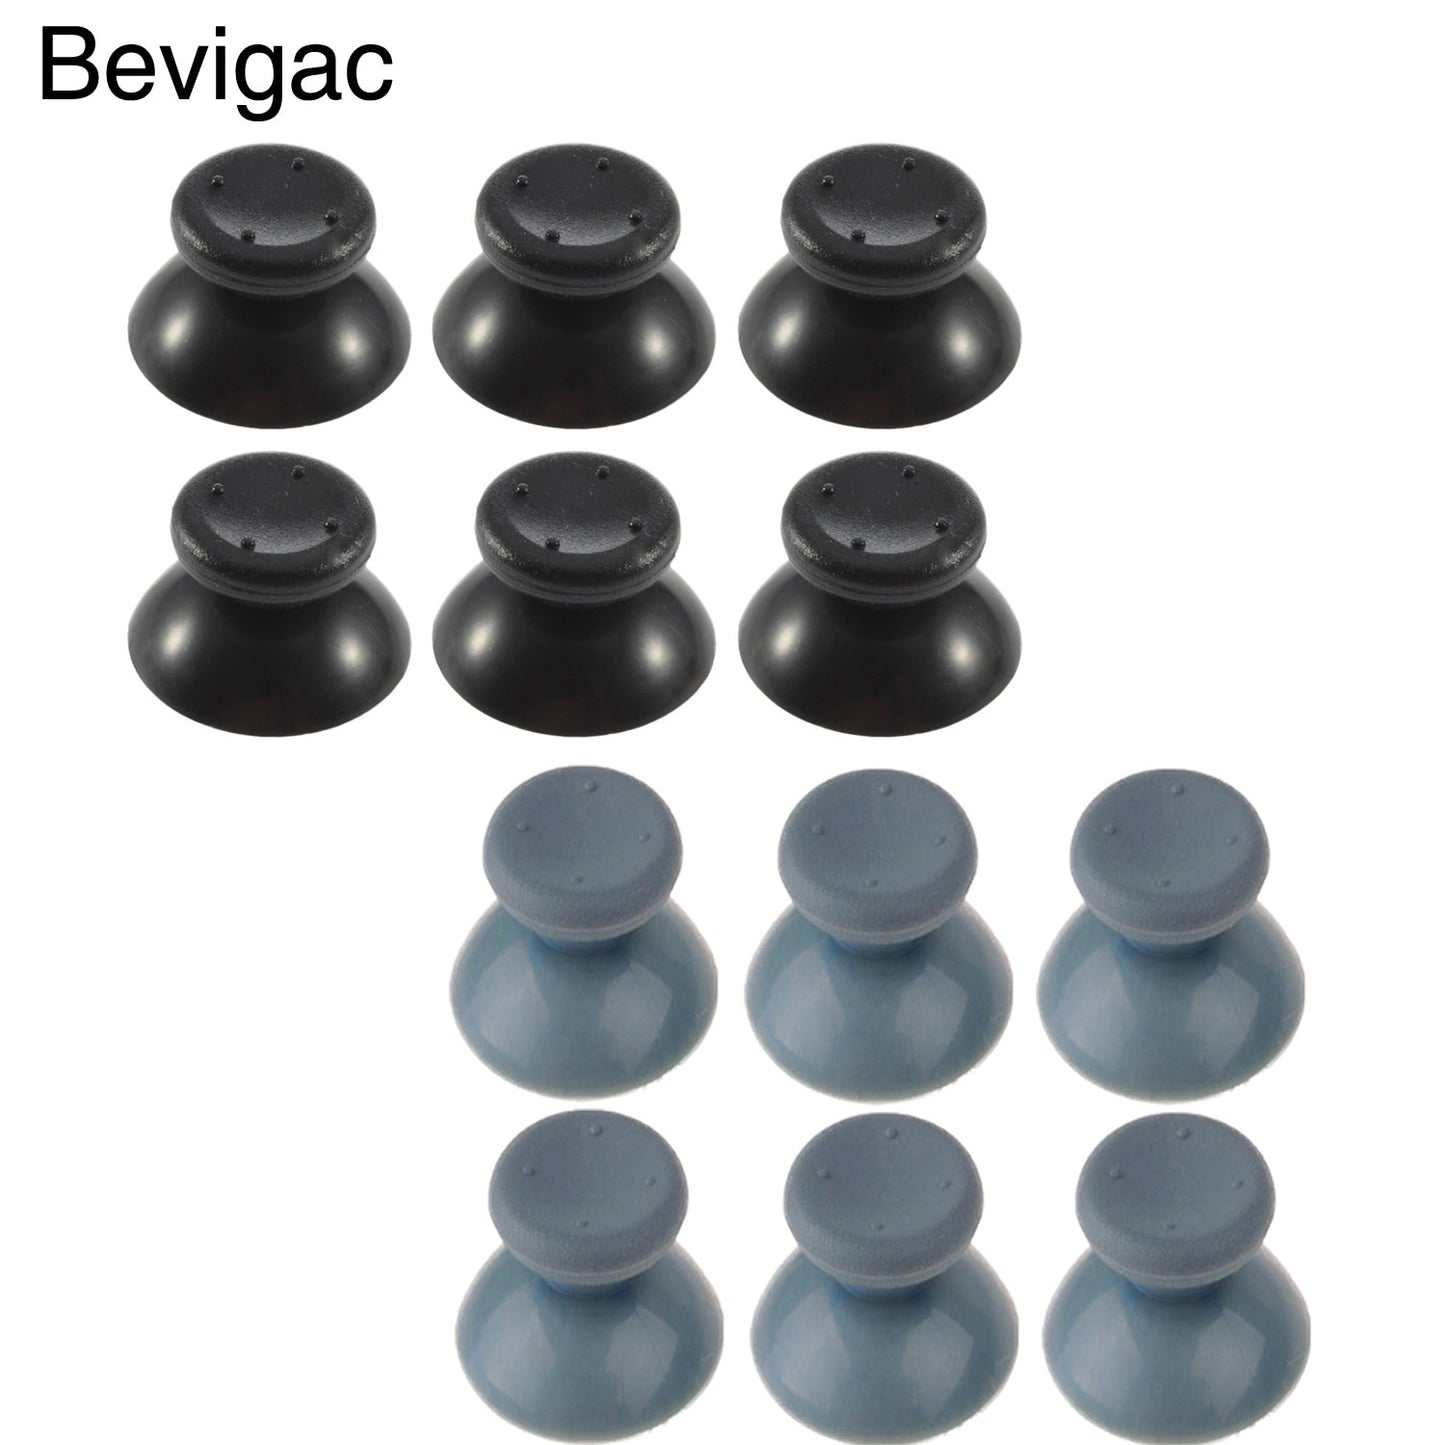 Bevigac 6PCS Plastic Replacement Thumb Stick Joystick Caps Grips Covers for XBOX 360 XBOX360 Controller Gamepads Accessories